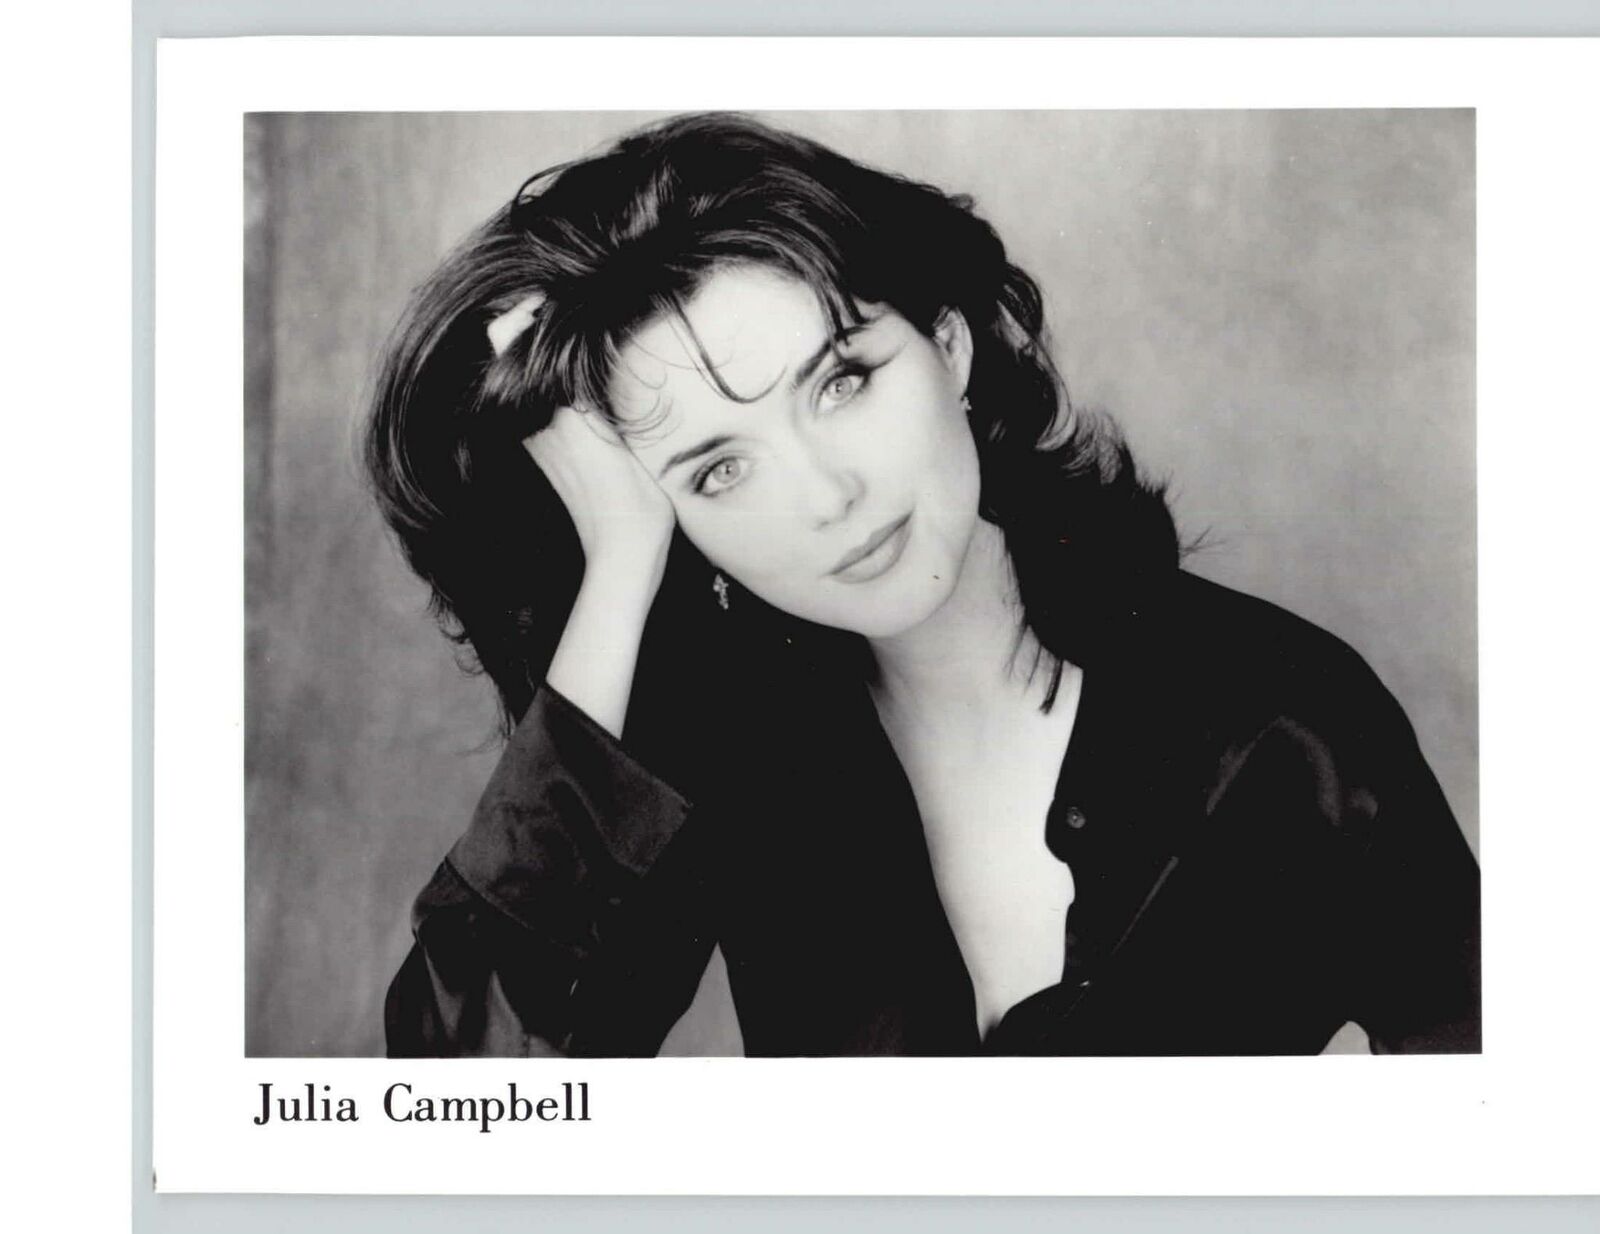 Julia Campbell - 8x10 Headshot Photo Poster painting - Romy & Michelle